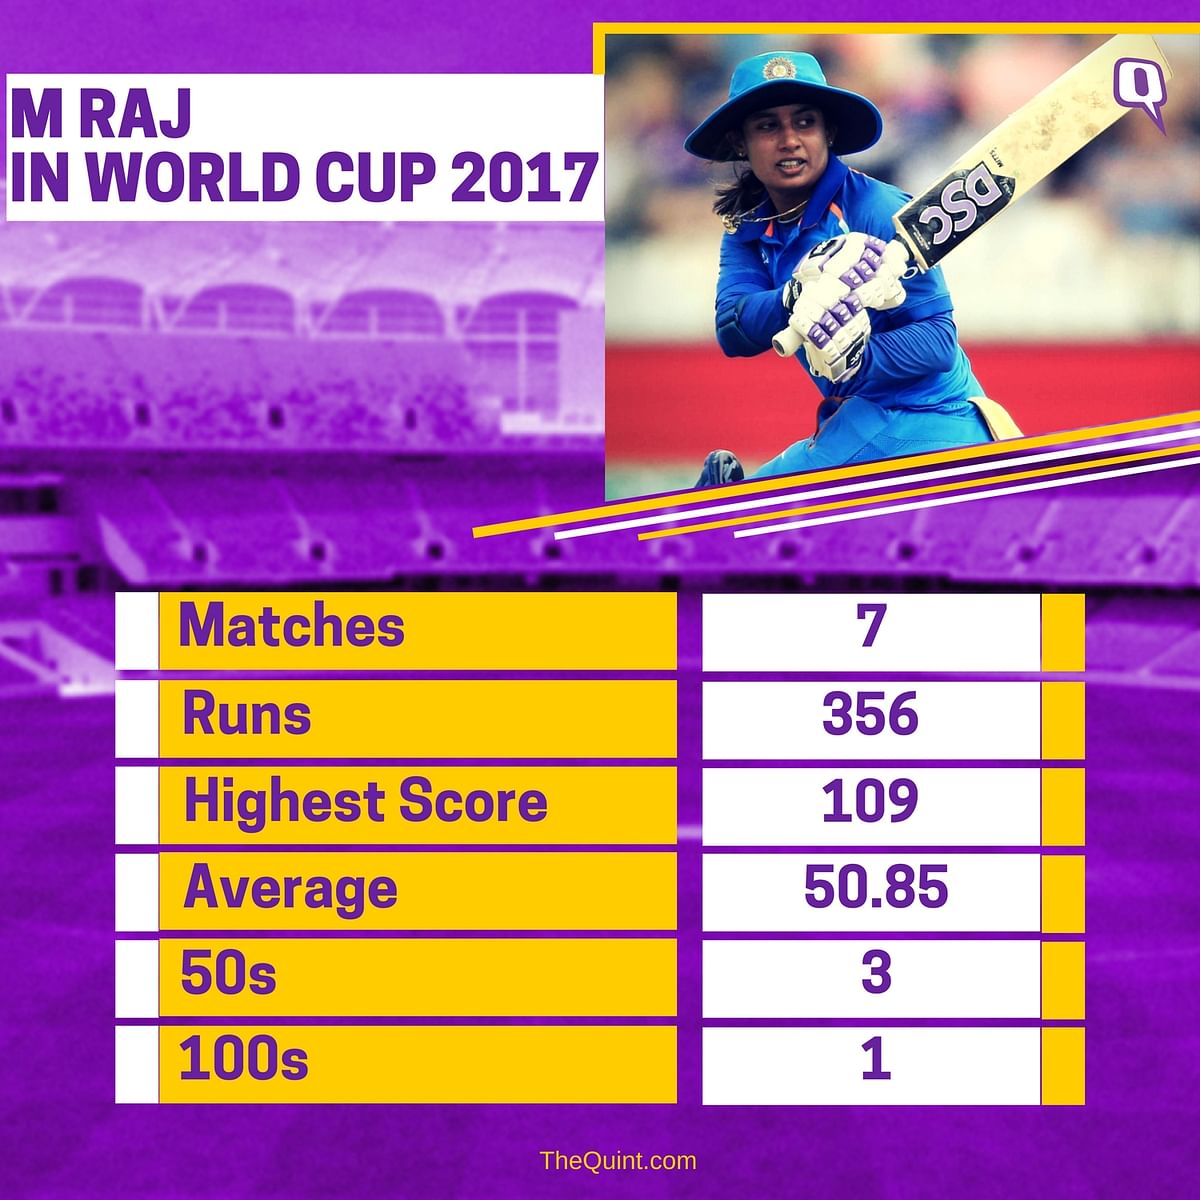 Here’s a look at the five key players for India ahead of the World Cup semi-final against Australia.